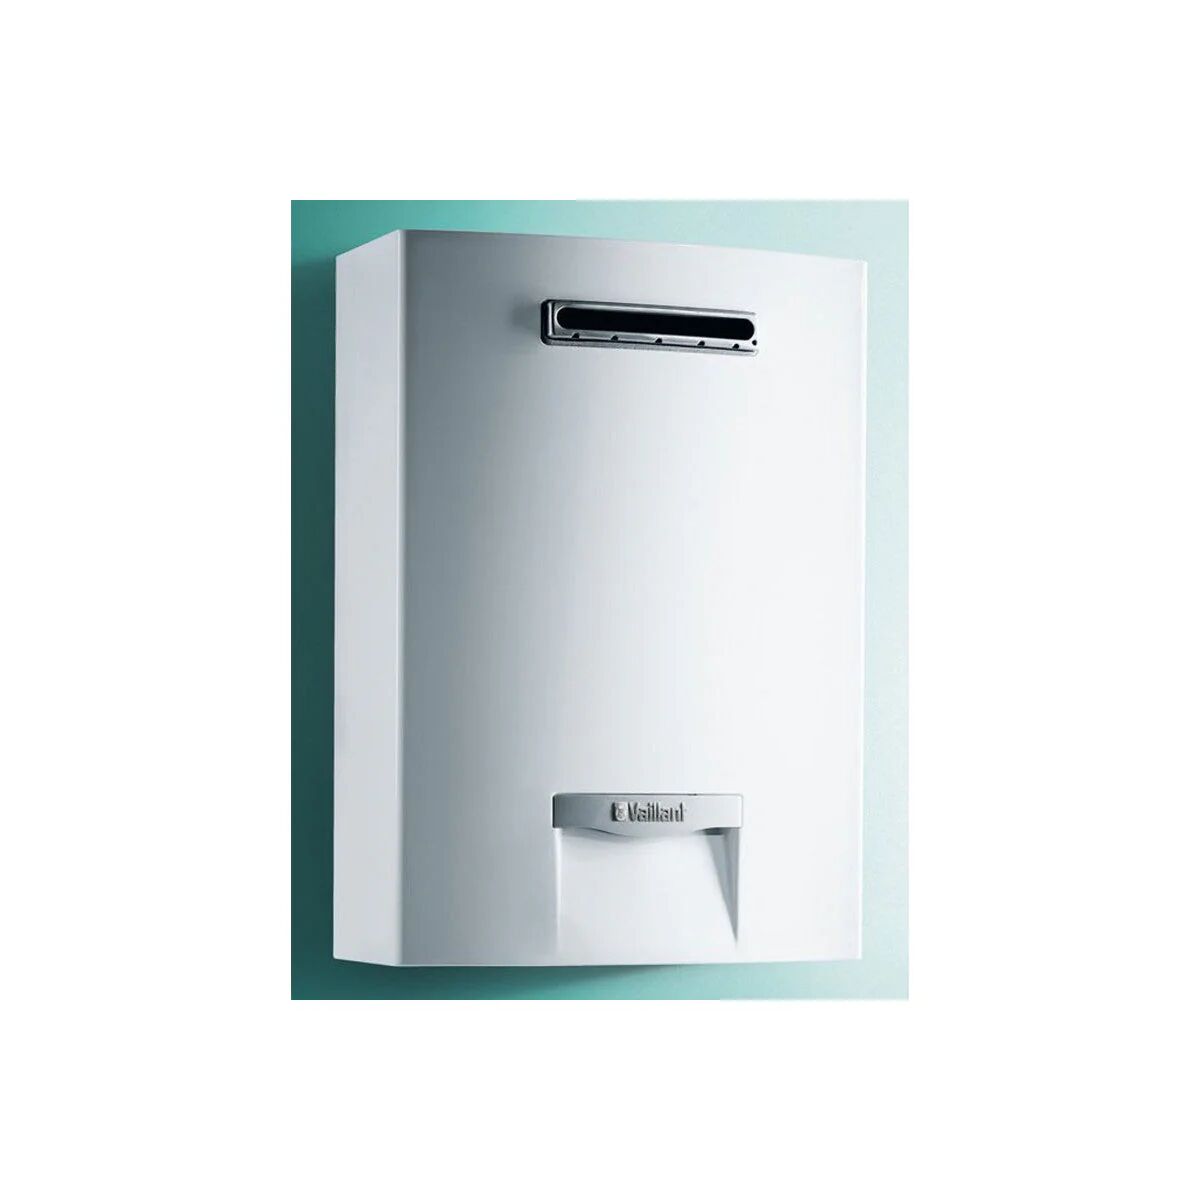 Scaldabagno Vaillant Outsidemag 158/1-5 Camera Stagna 15 Lt Low Nox Gpl A